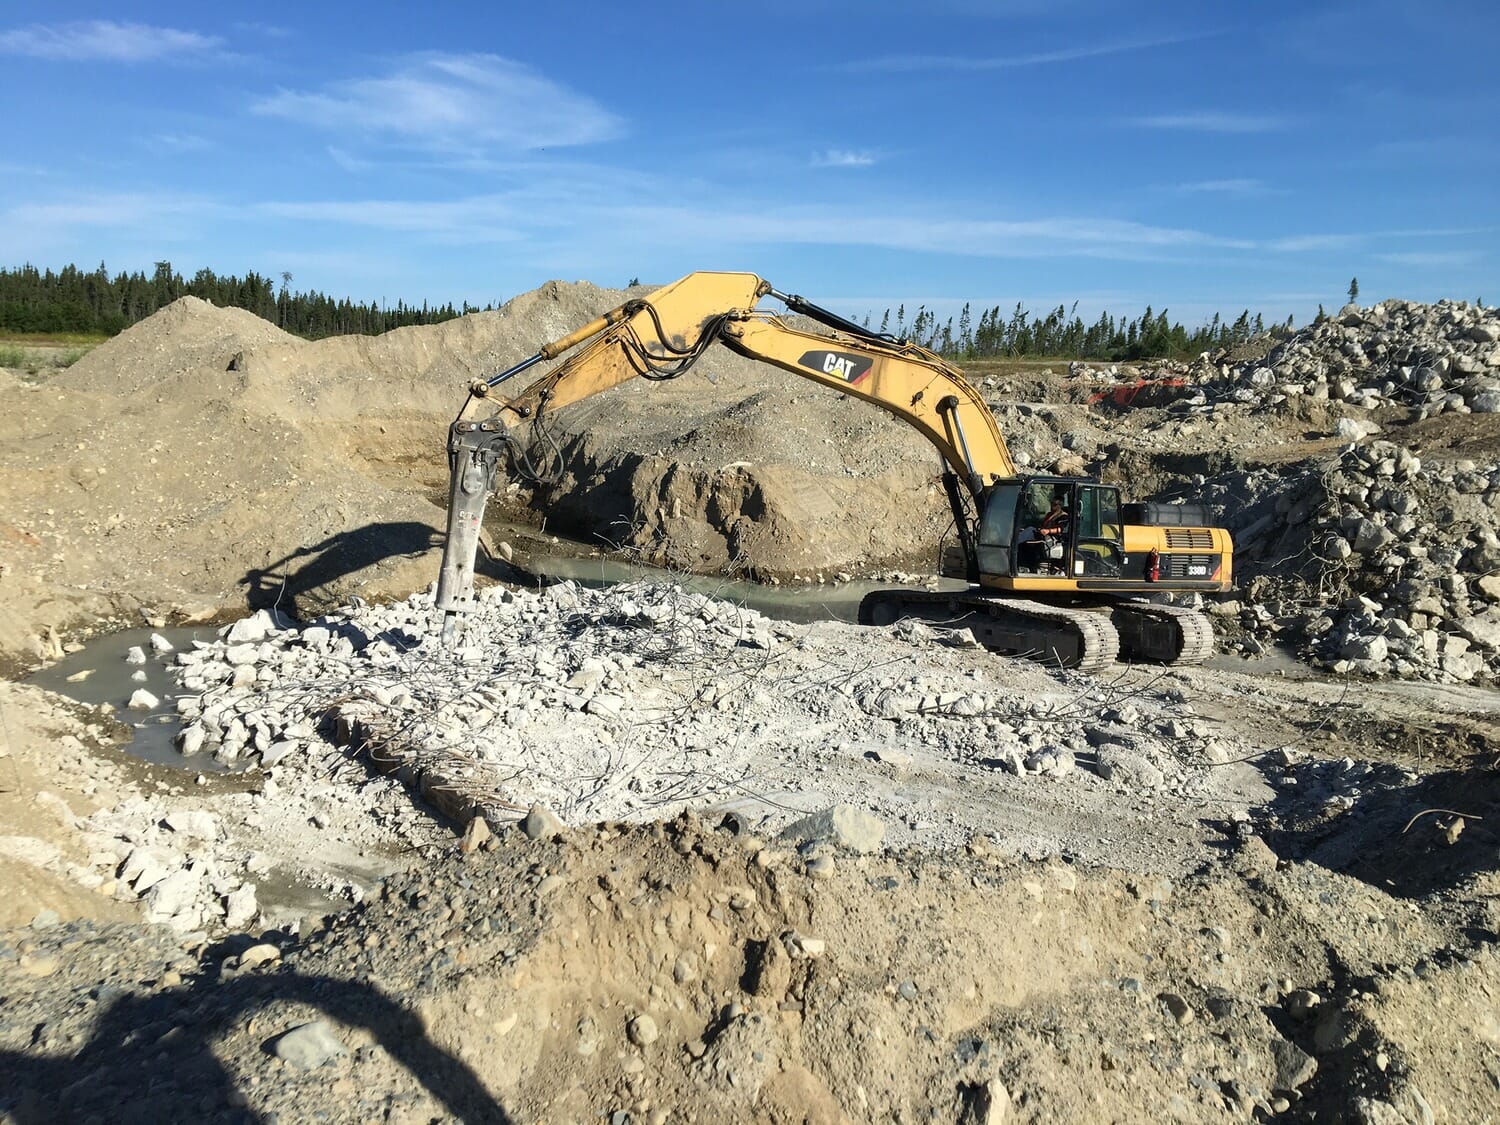 An excavator is working on a pile of rocks.